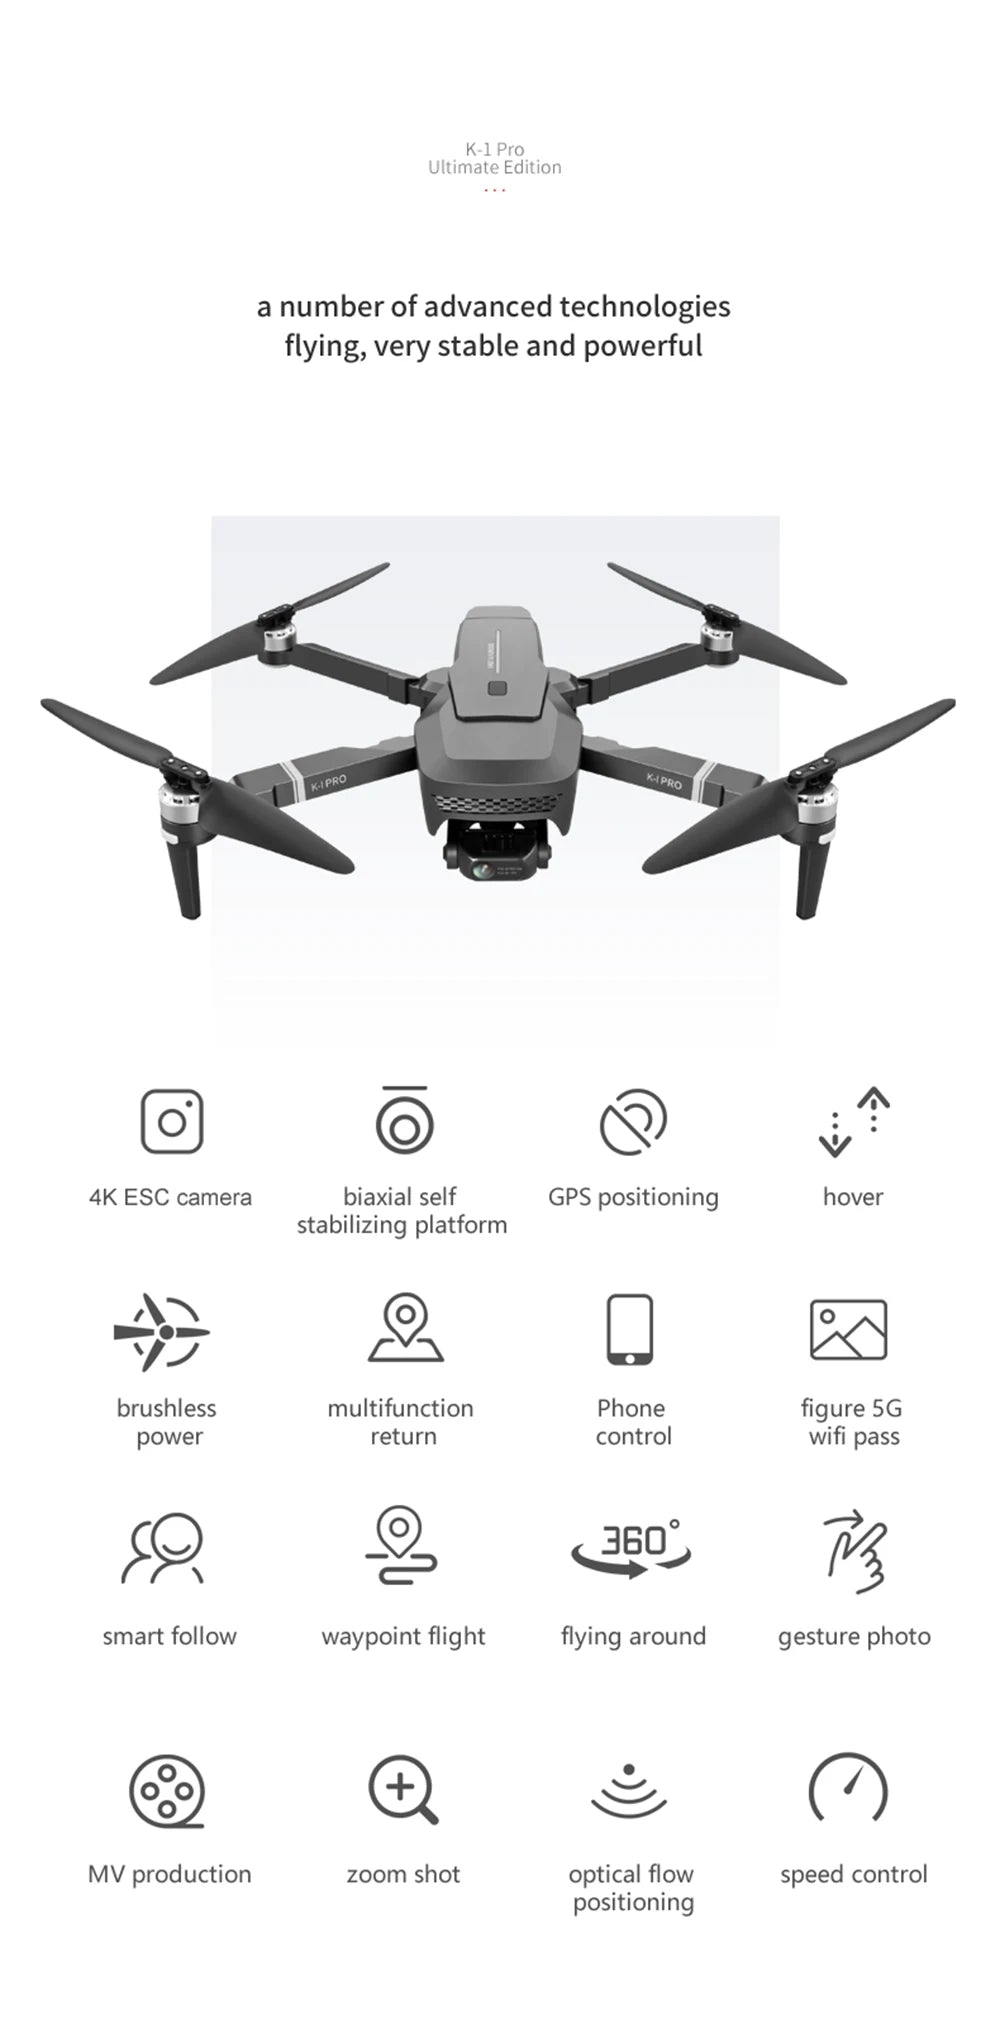 VISUO ZEN K1 PRO Drone, K-1 Pro Ultimate Edition number of advanced technologies flying, very stable and powerful 4K ESC